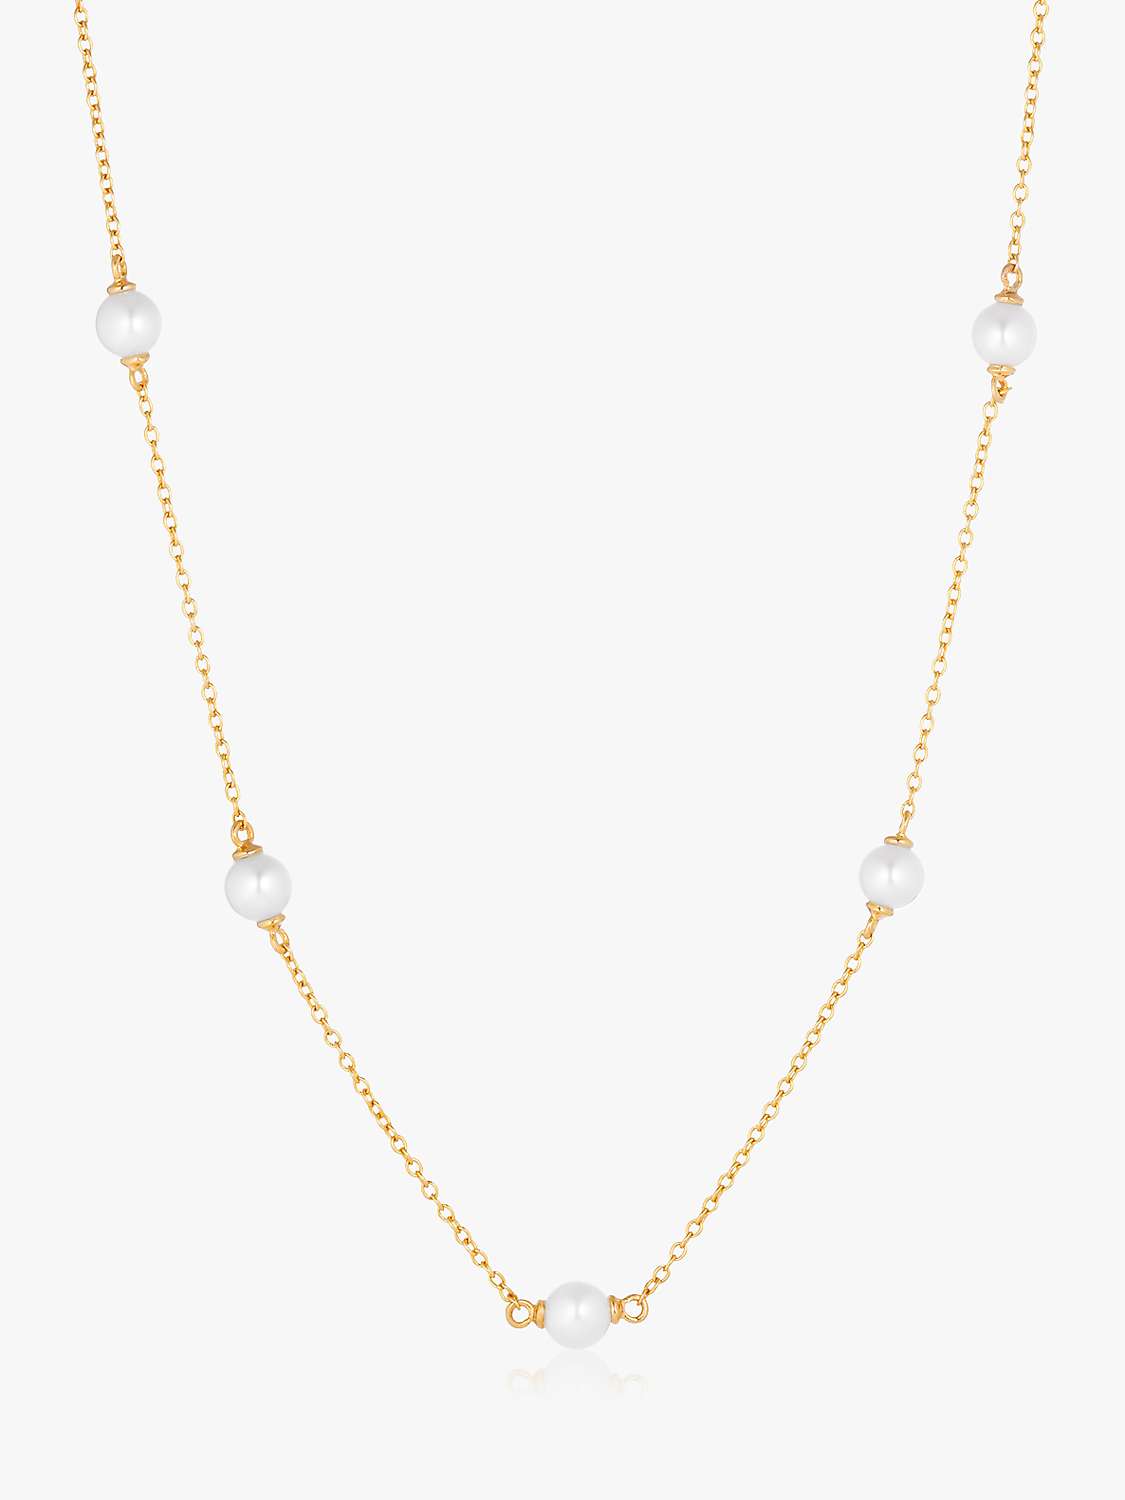 Buy Sif Jakobs Jewellery Padua Cinque Freshwater Pearl Chain Necklace, Gold Online at johnlewis.com